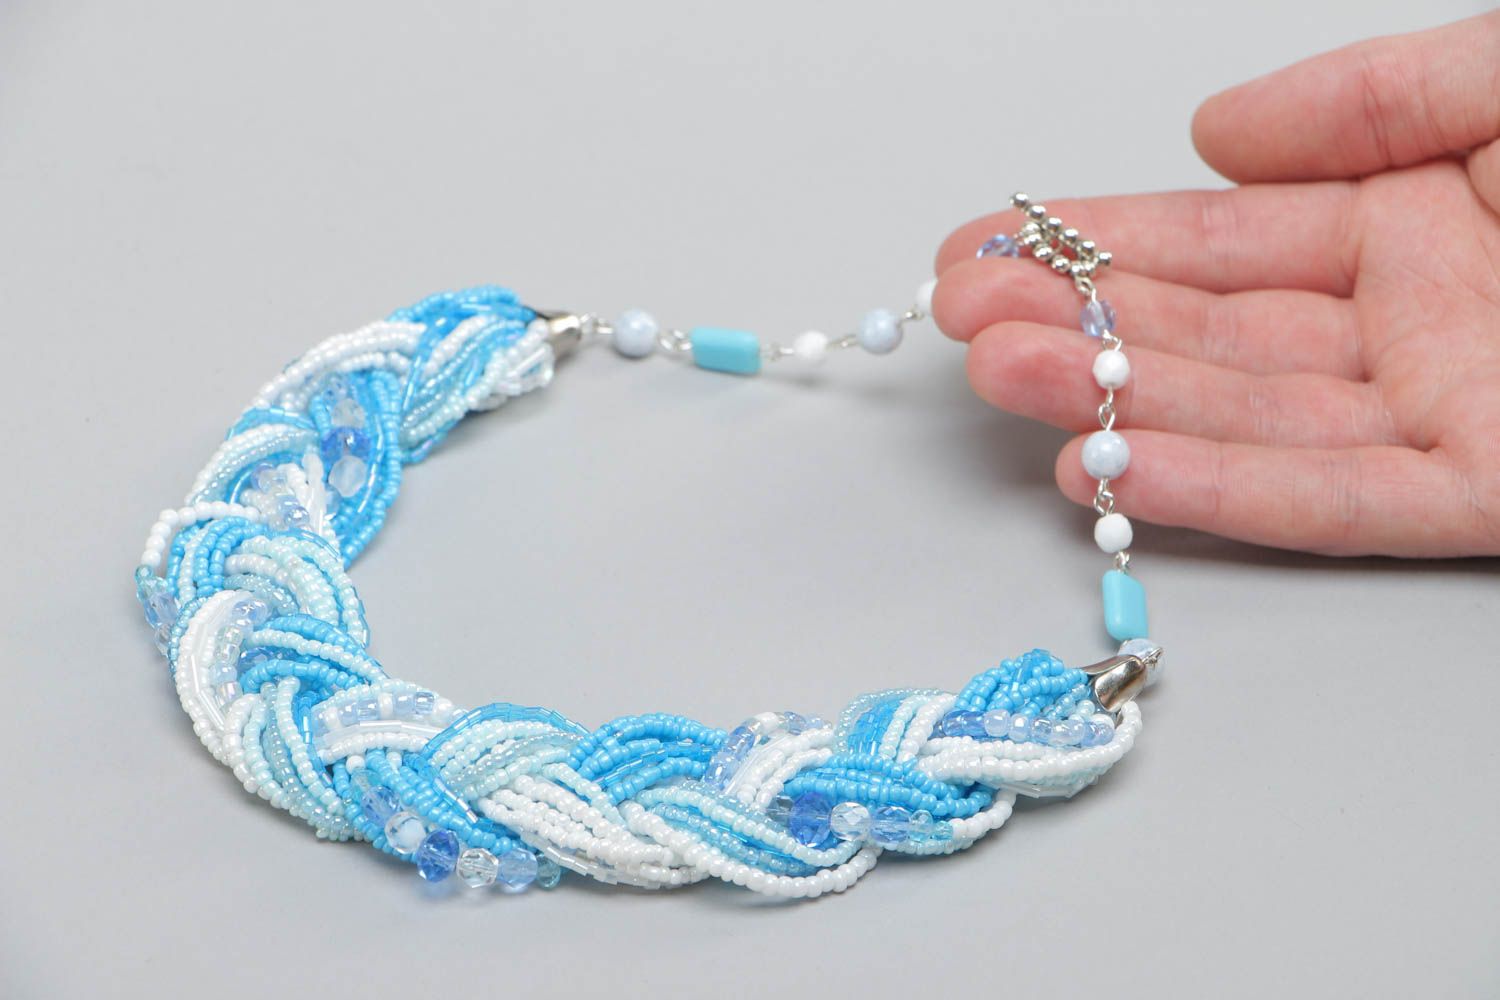 Handmade volume designer necklace woven of blue and white beads for women photo 5